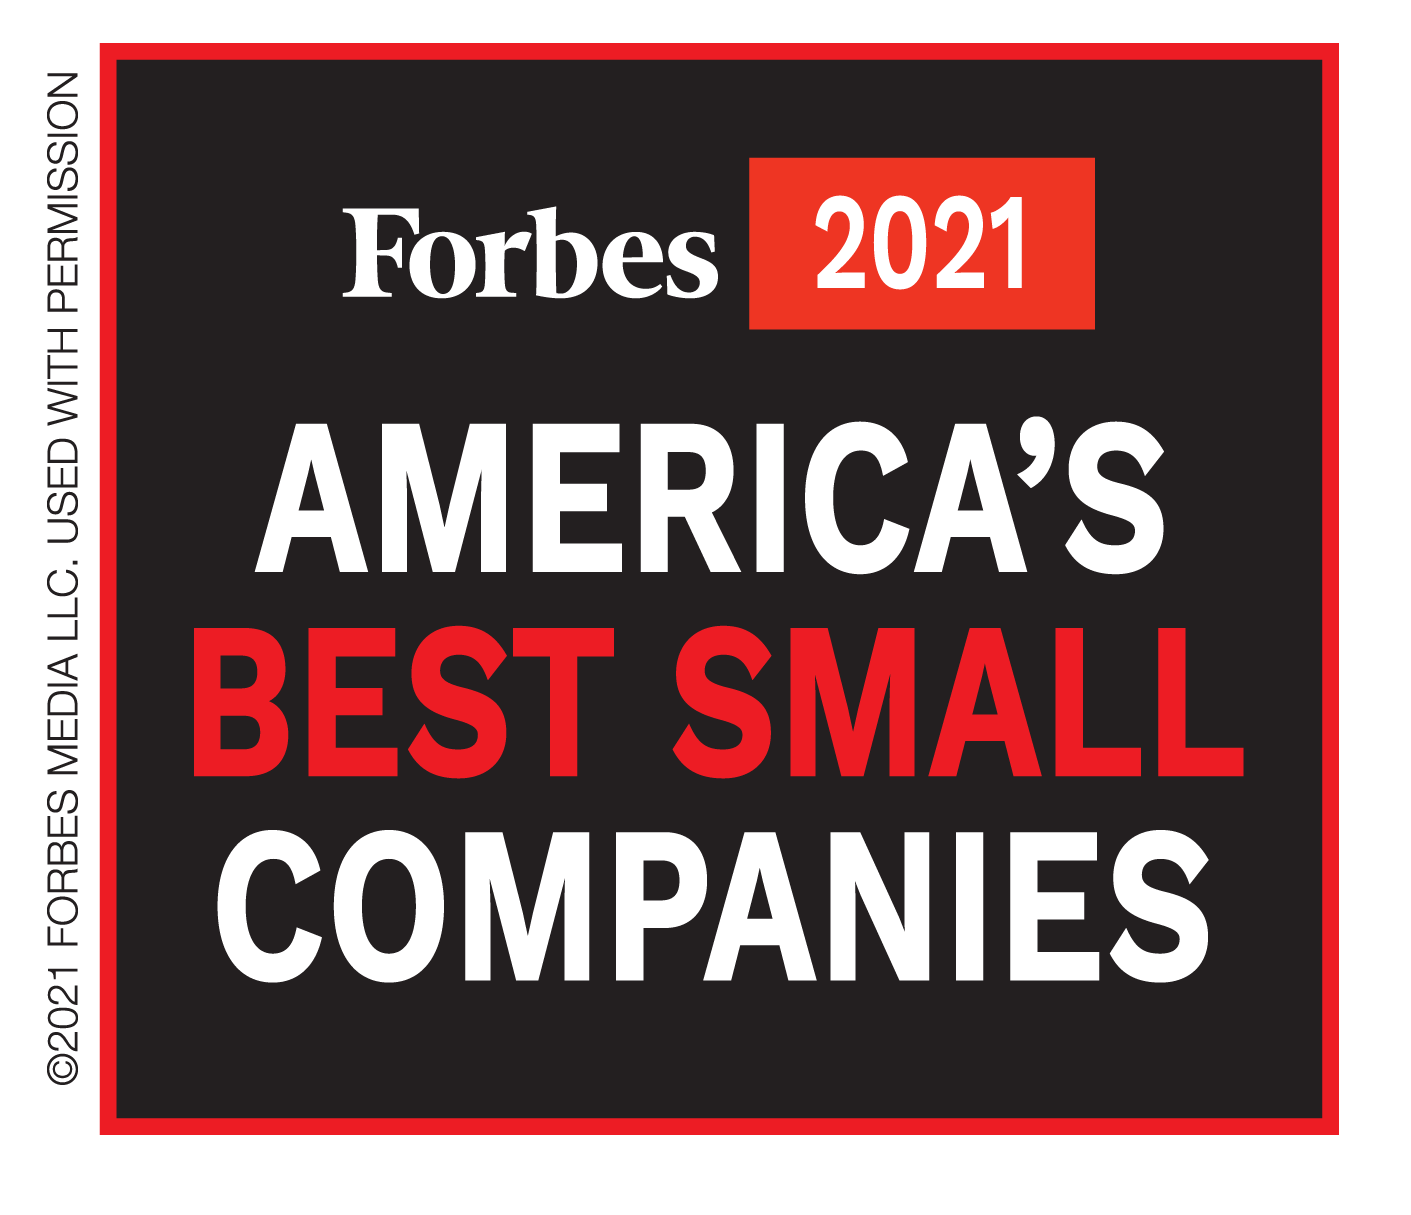 Forbes 2021 America's Best Small Companies